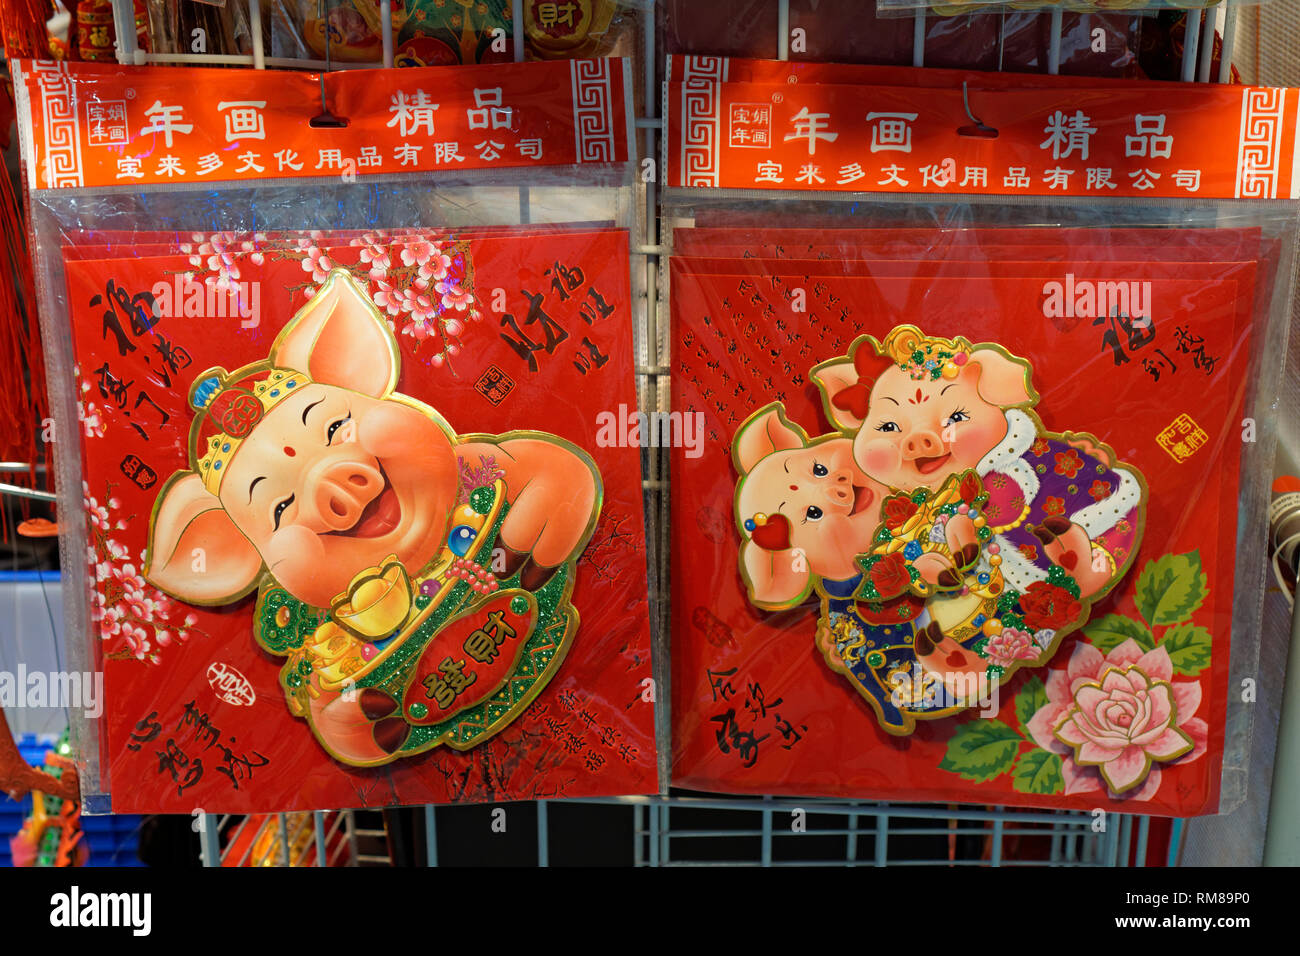 Year of the Pig 2019 decorations, Chinese New Year celebrations at International Village Mall, Chinatown, Vancouver,  BC, Canada Stock Photo